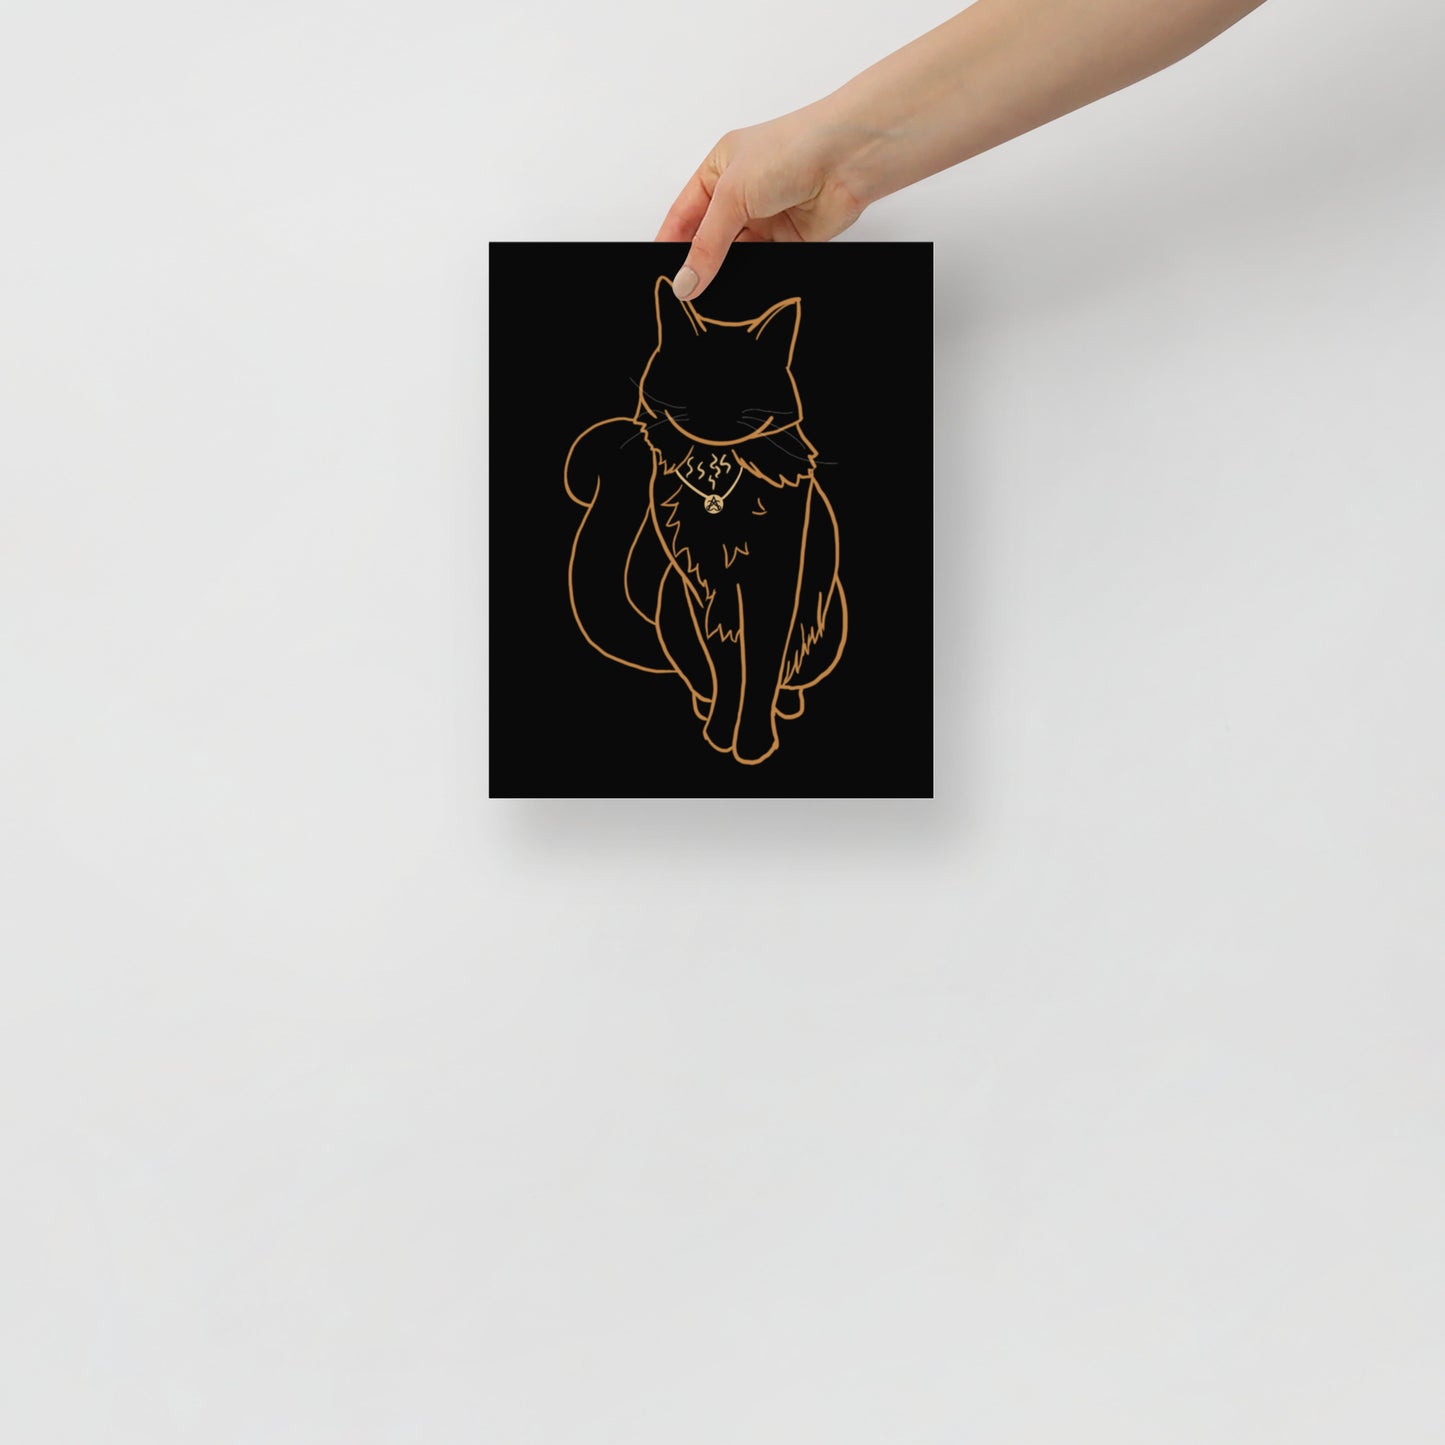 A hand holds a 8" by 10" poster with the line art drawing of Rufus the cat by Aras Sivad.